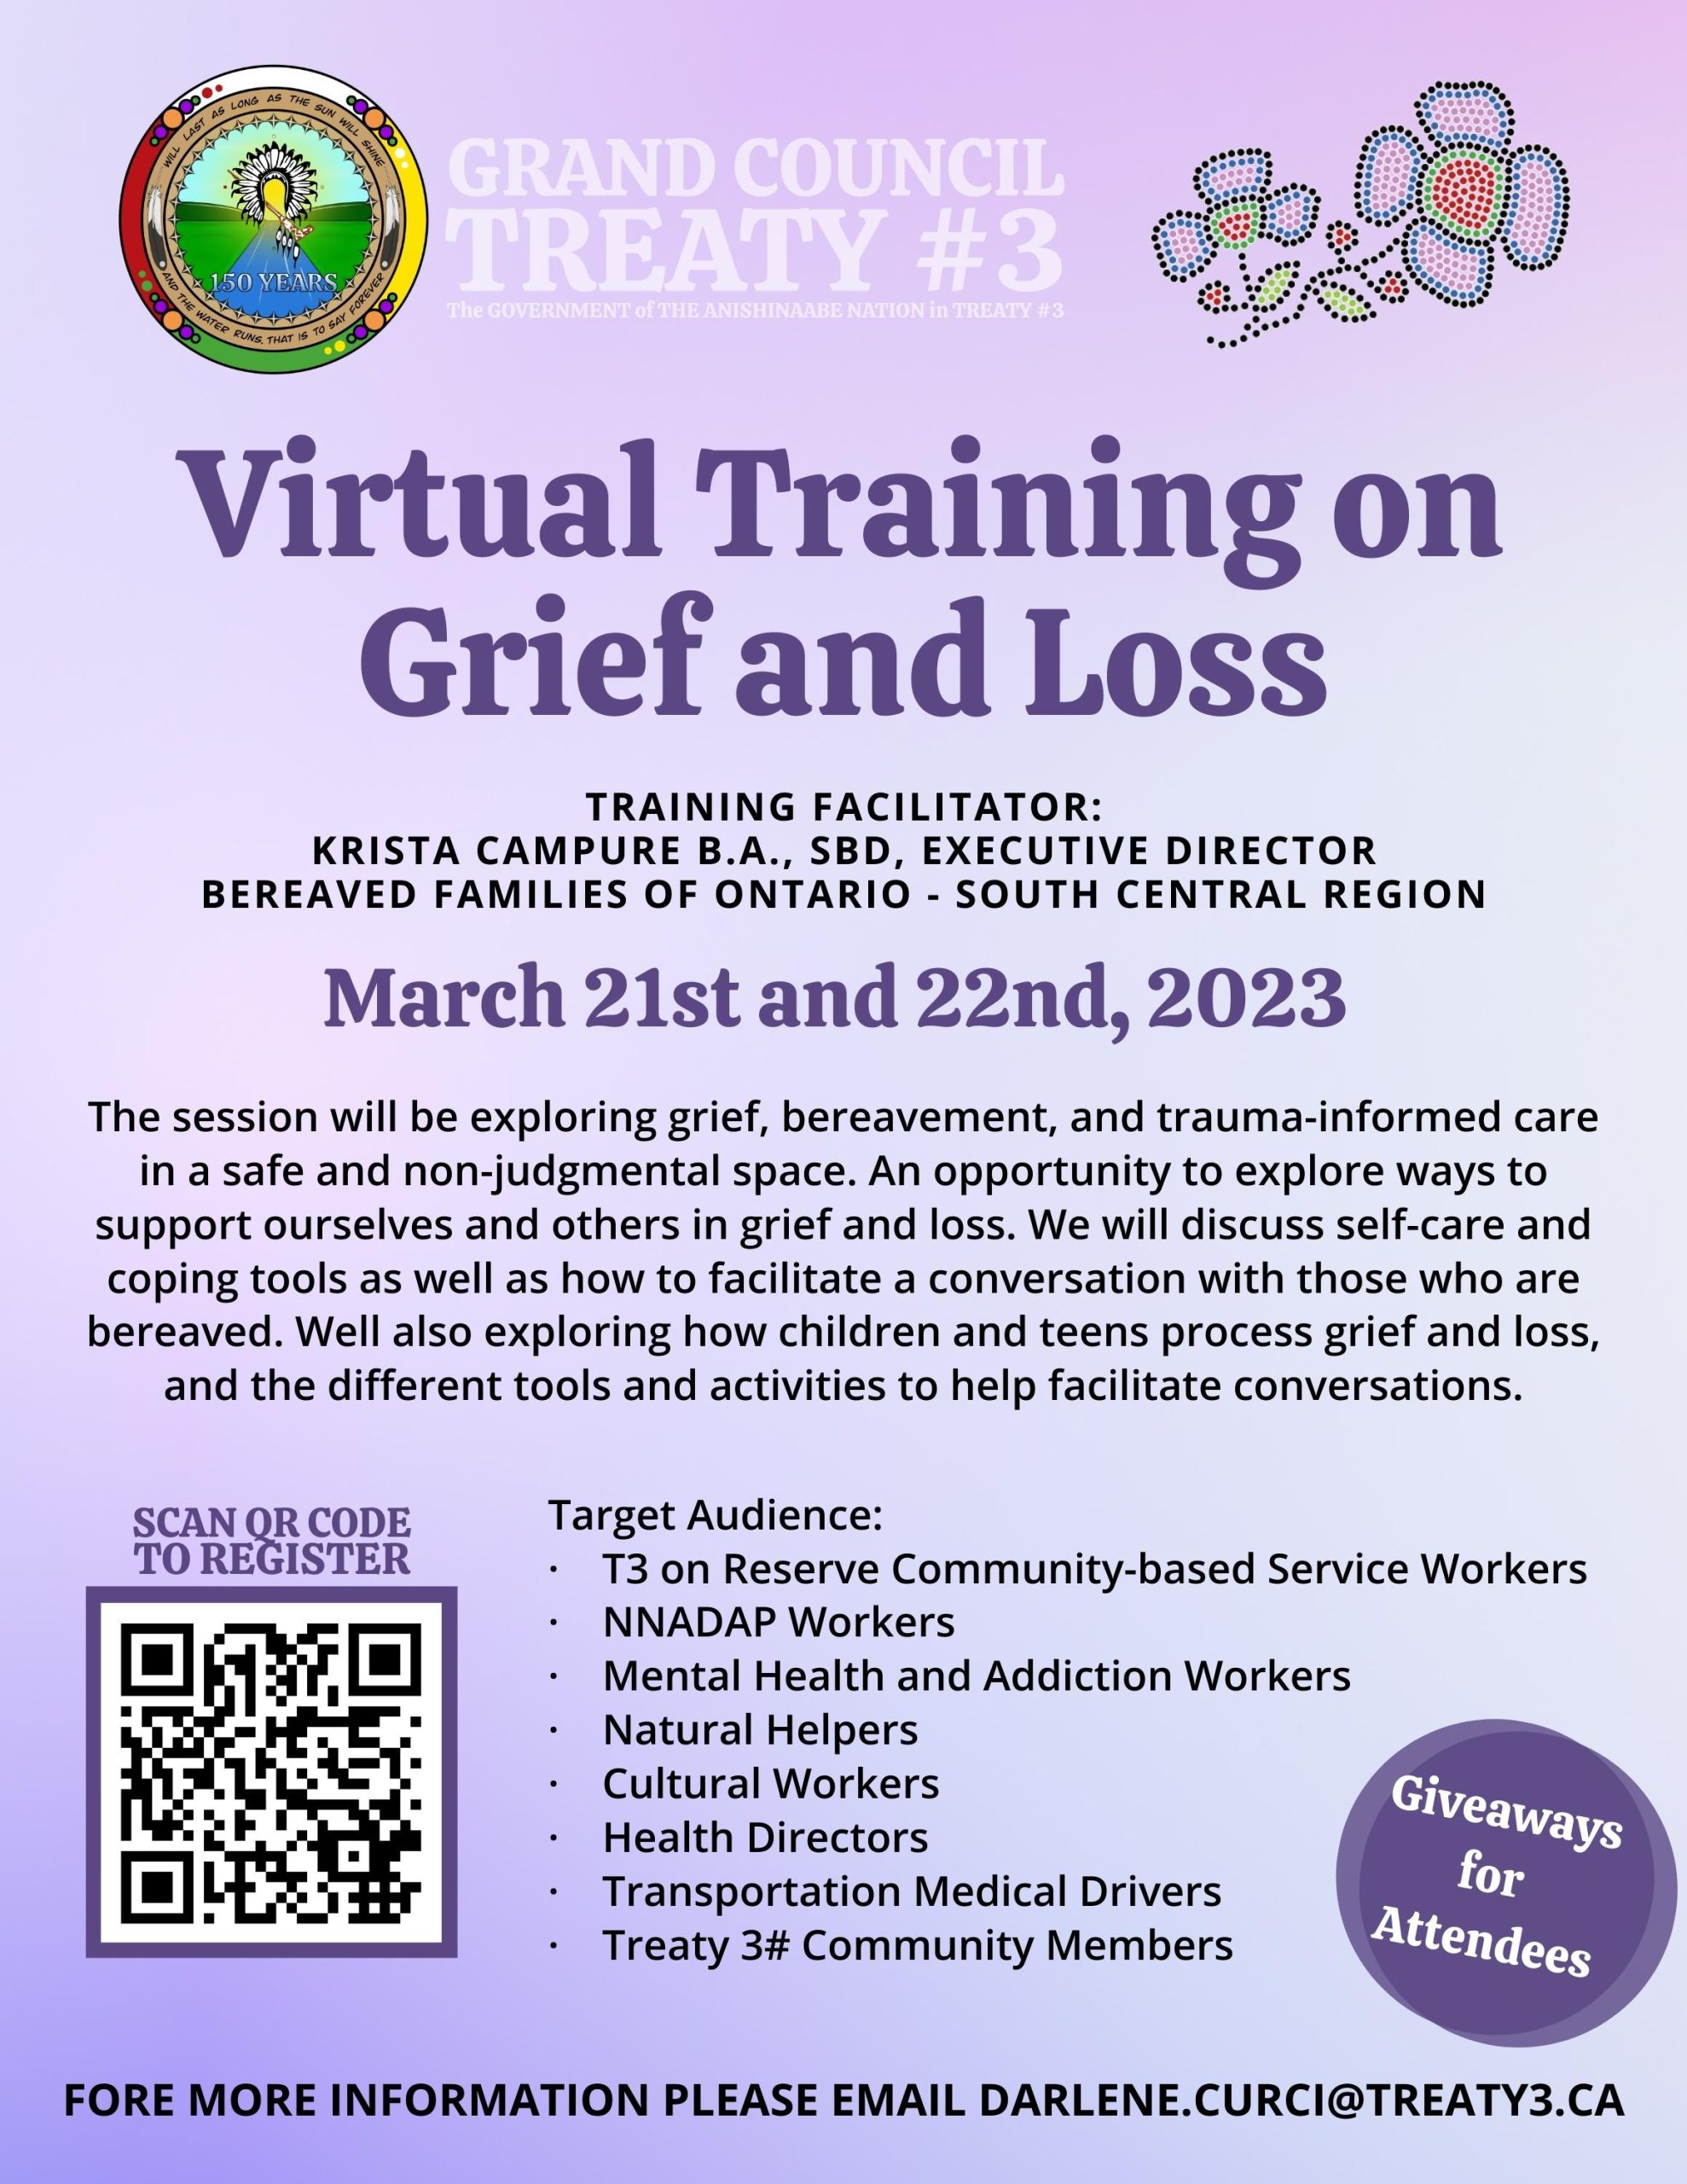 Virtual Training on Grief and Loss